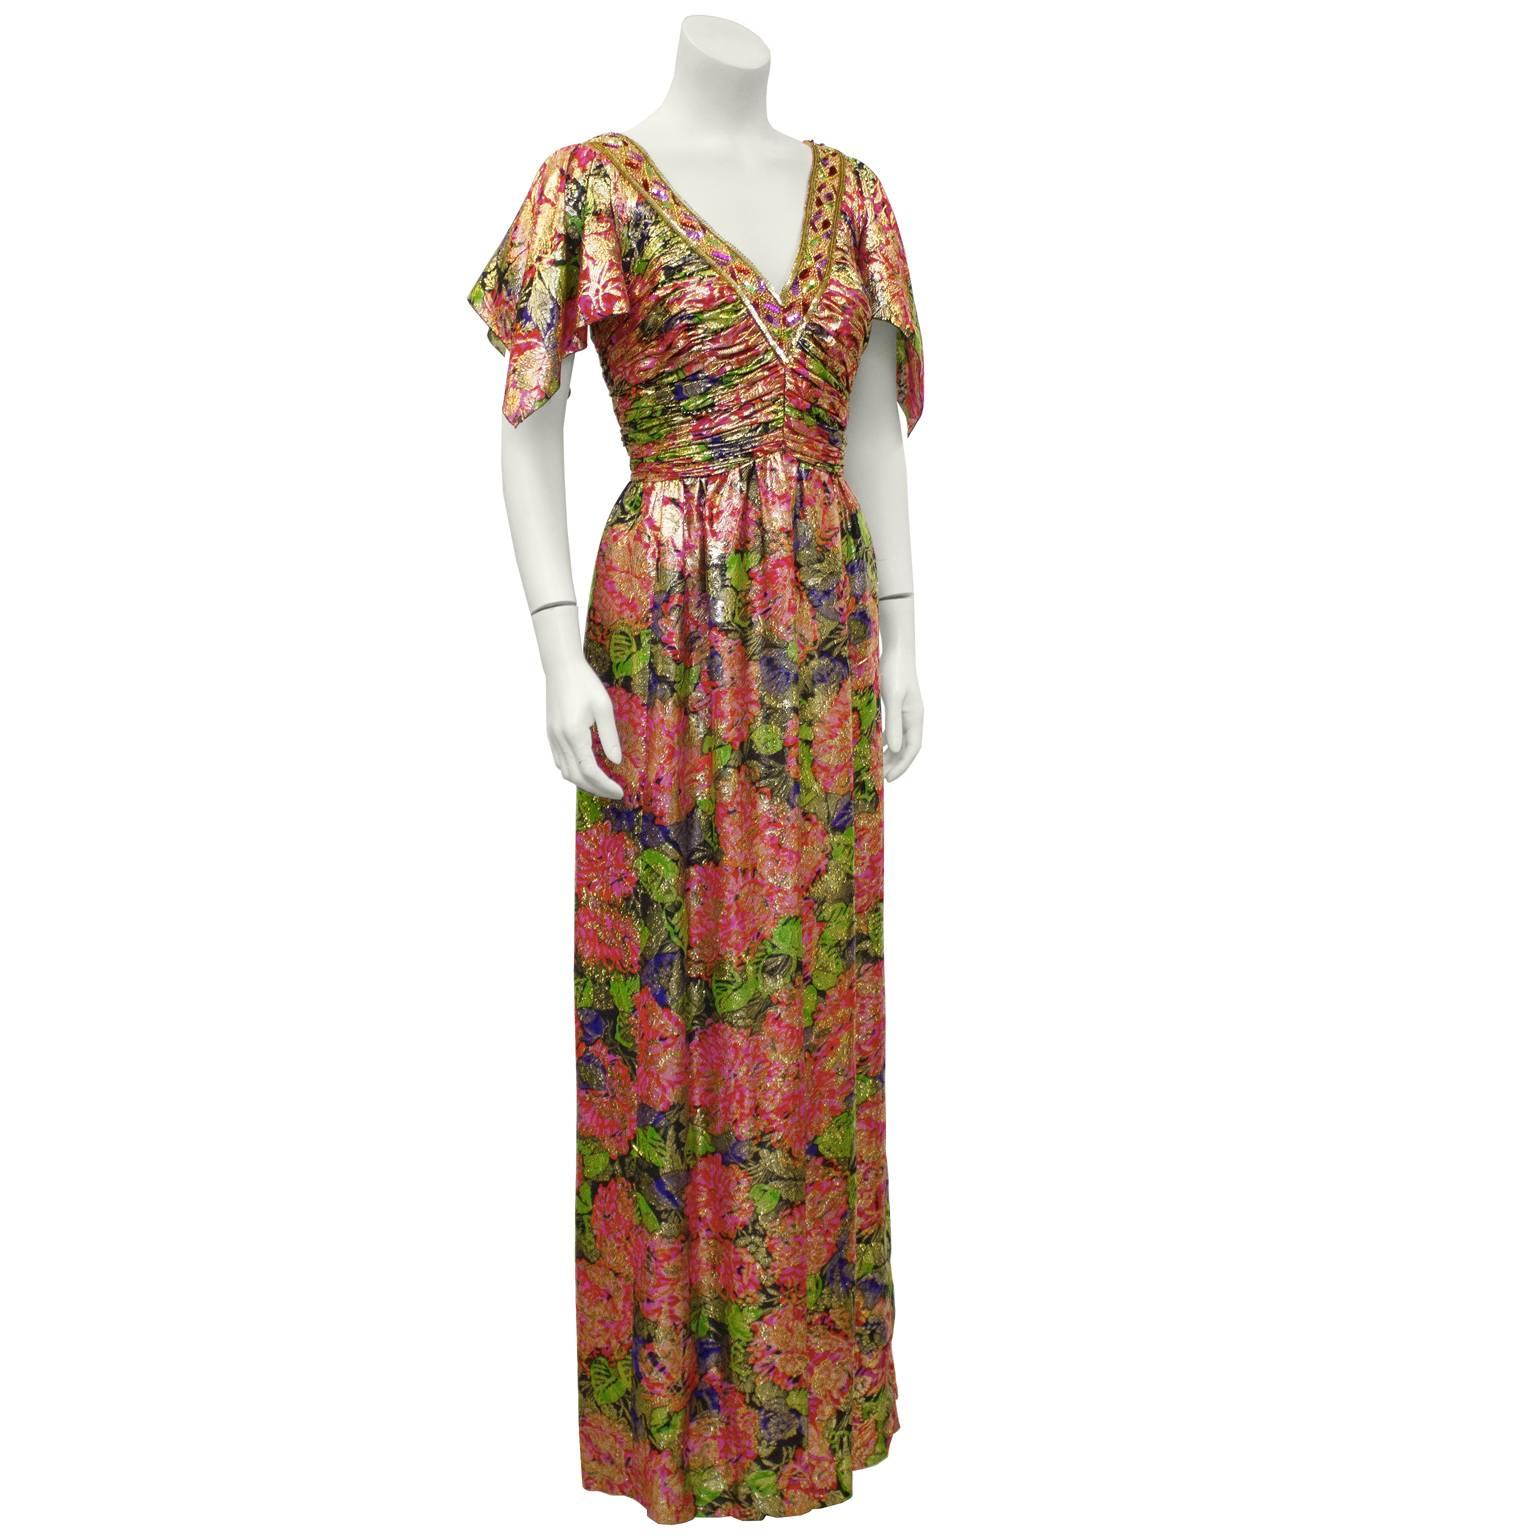 Floral pink and gold brocade Moroccan inspired gown from the 1970's. The gown features a V neckline adorned with a bead and sequin band. The bodice is ruched with sleeves finished hanky style. The skirt falls from the natural waist with a soft